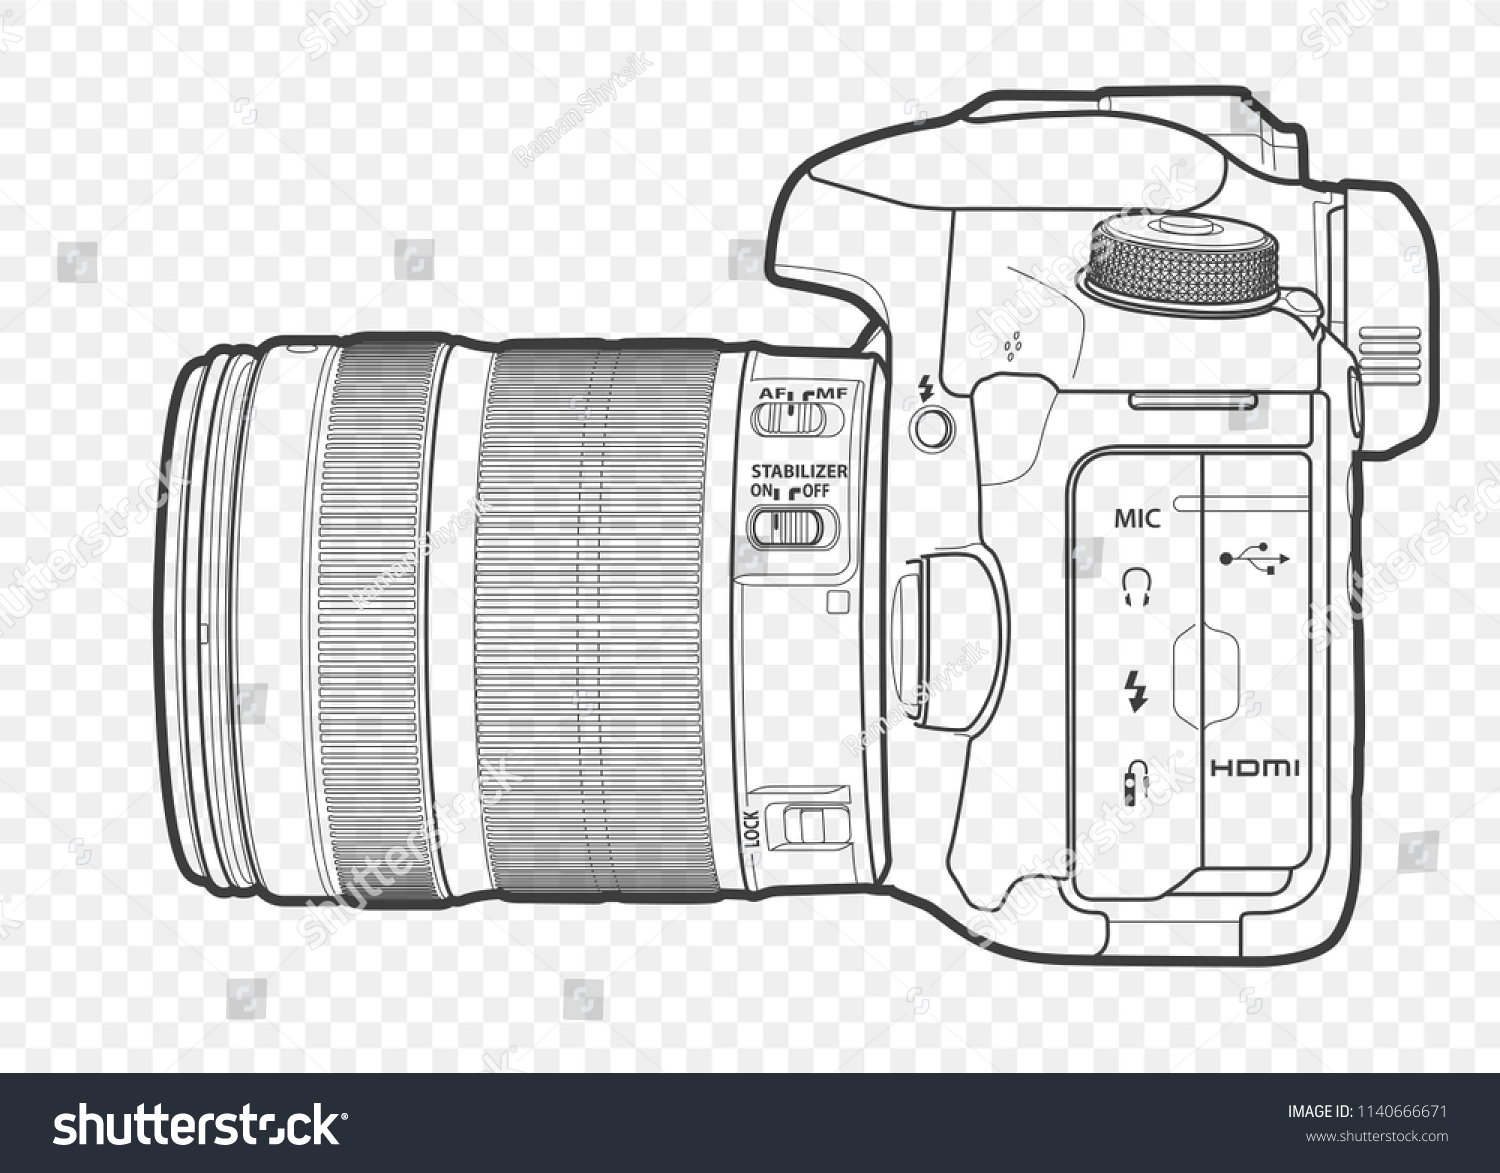 SVG of Outline vector illustration of reflex slr camera with lens in half-face, drawn with lines. svg